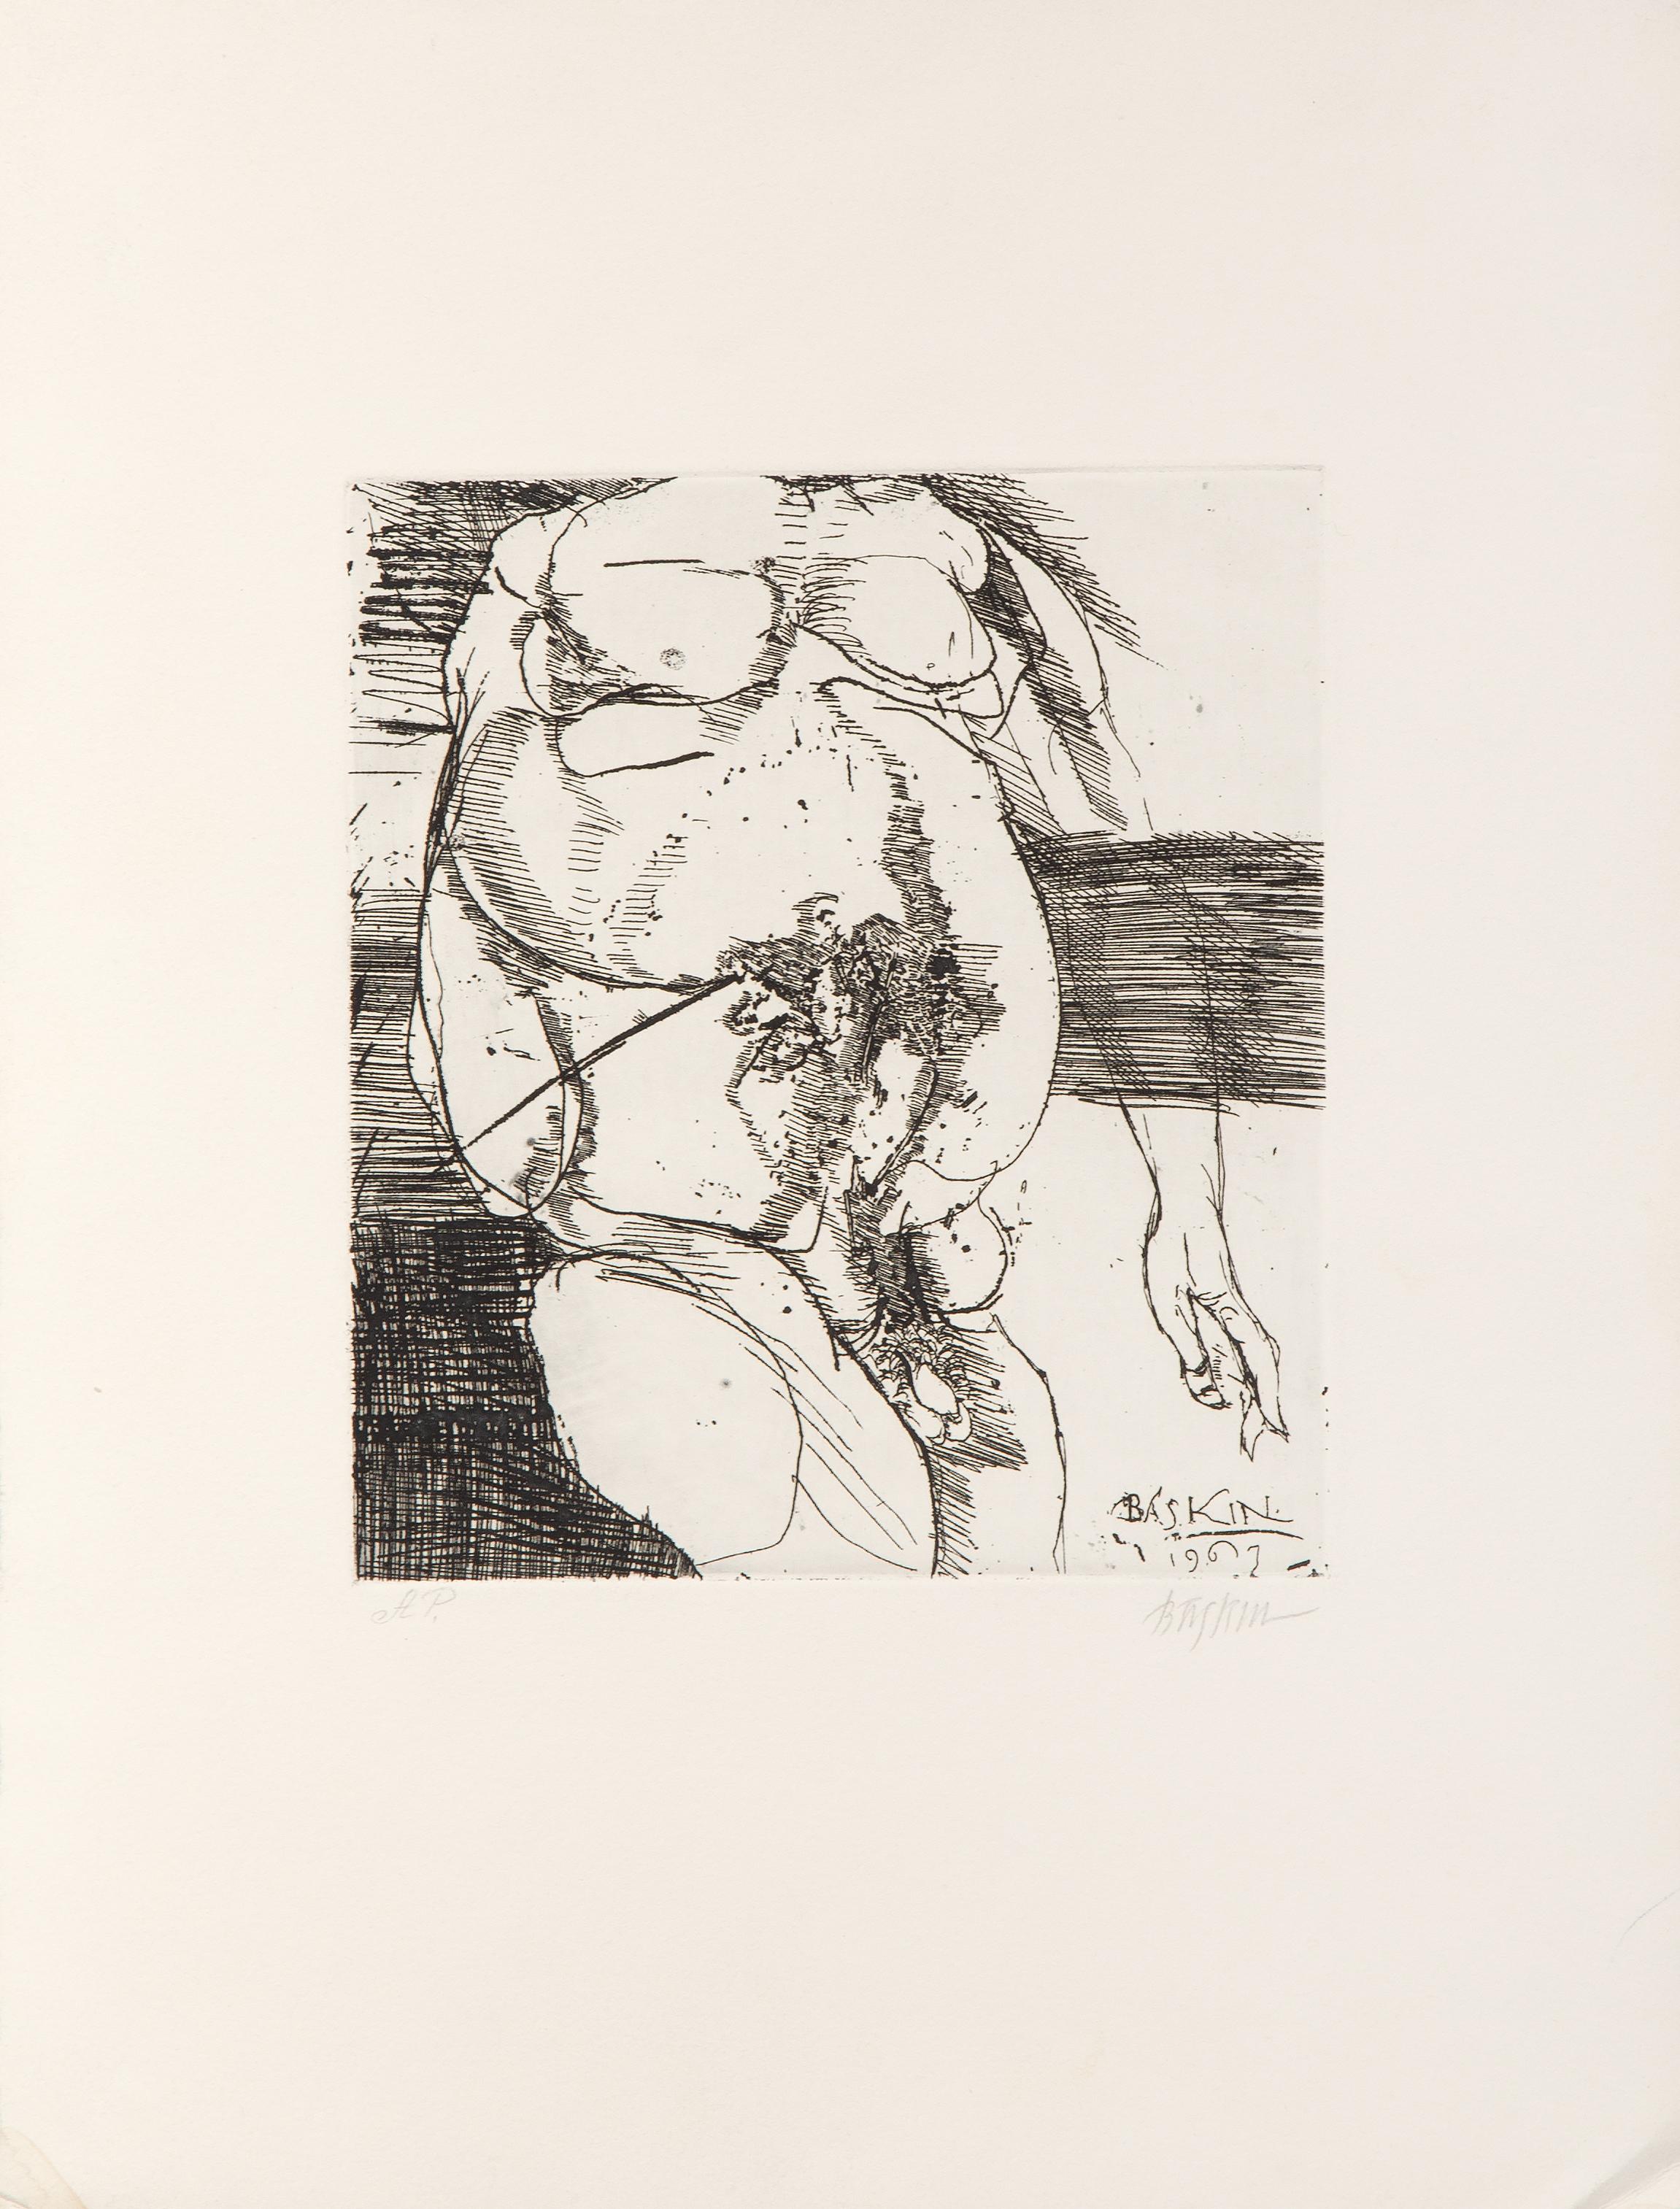 Torso
Leonard Baskin, American (1922–2000)
Date: 1967
Etching, signed and numbered in pencil, dated in the plate
Edition of HP
Image Size: 10 x 8.75 inches
Size: 20 x 15 in. (50.8 x 38.1 cm)